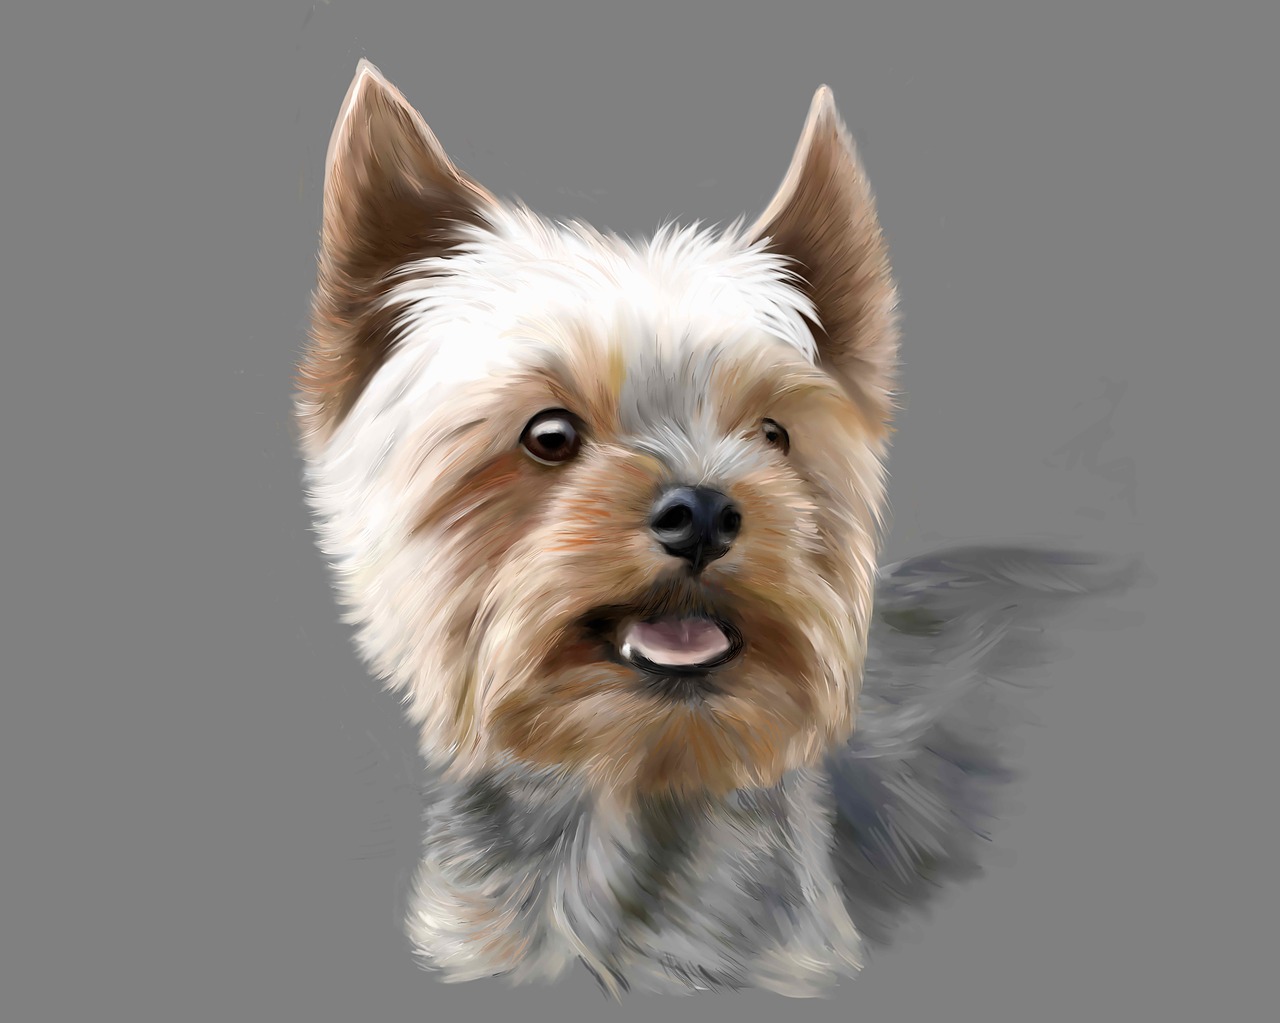 a close up of a dog on a gray background, a digital painting, yorkshire terrier, air brush illustration, sharp high detail illustration